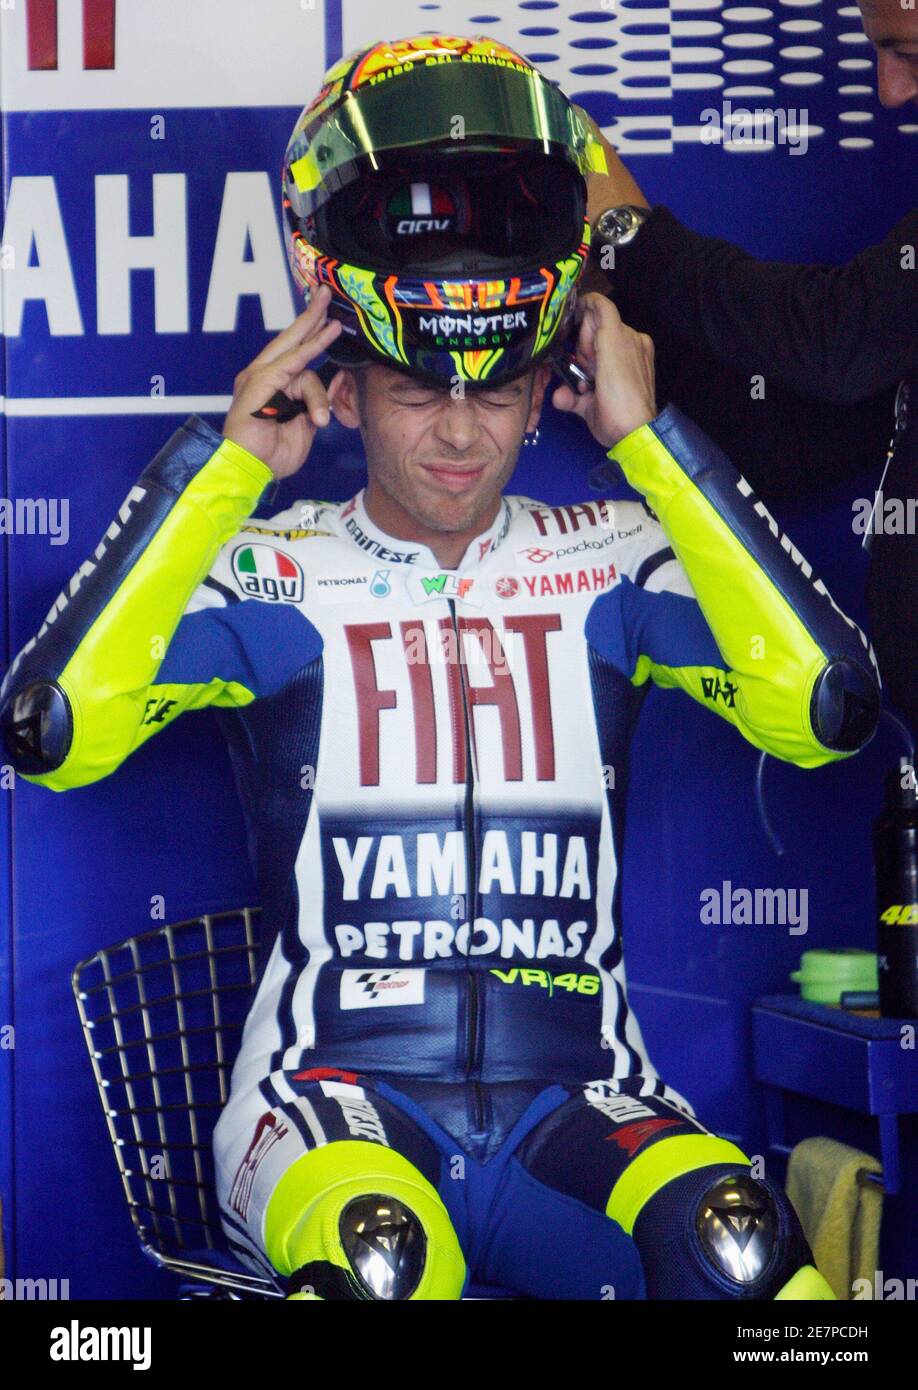 Yamaha MotoGP rider Valentino Rossi of Italy prepares himself for the  second free practice session of the Czech Grand Prix at the Masaryk Circuit  in Brno August 15, 2009. REUTERS/Petr Josek (CZECH